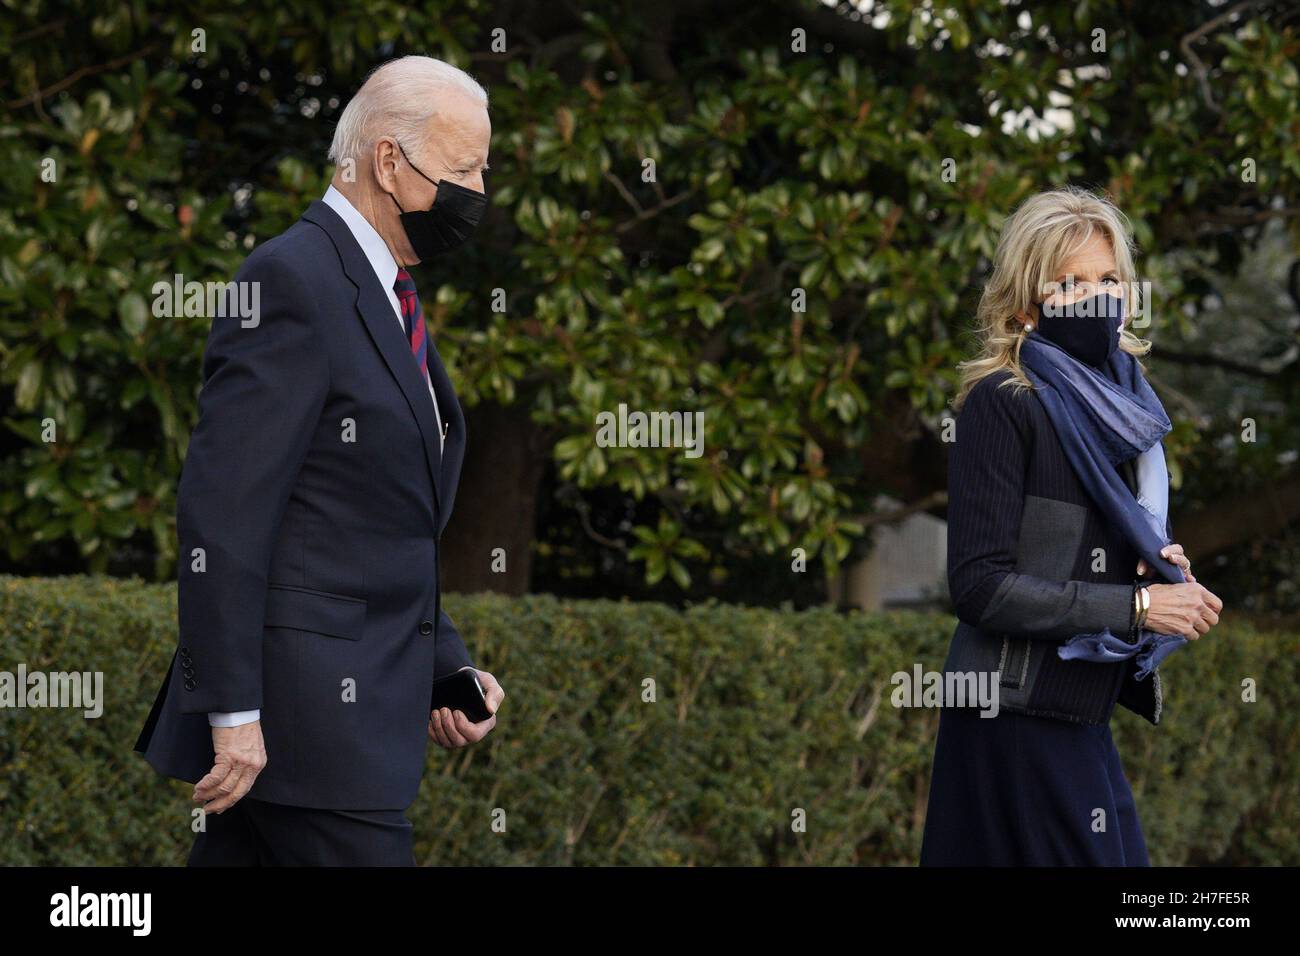 Washington, United States. 22nd Nov, 2021. U.S. President Joe Biden and first lady Jill Biden depart from the White House in Washington on Monday, November 22, 2021 to celebrate Friendsgiving with service members and military families in Fort Bragg, North Carolina. Photo by Yuri Gripas/UPI Credit: UPI/Alamy Live News Stock Photo